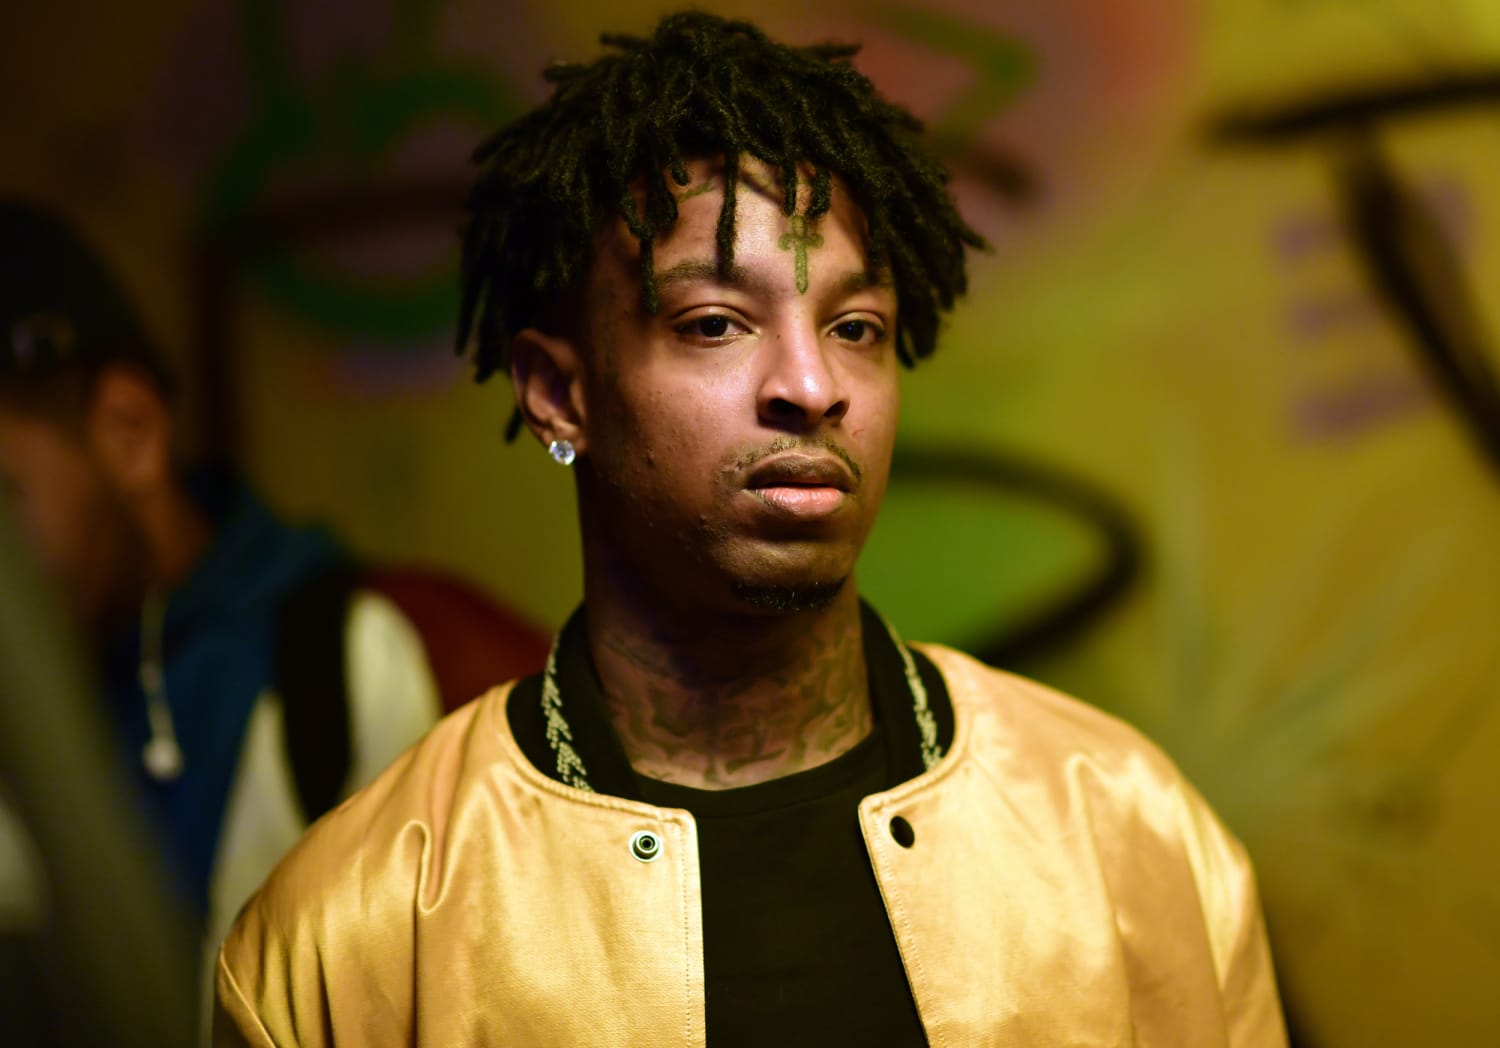 Rapper 21 Savage donates $25K to organization that helped him during